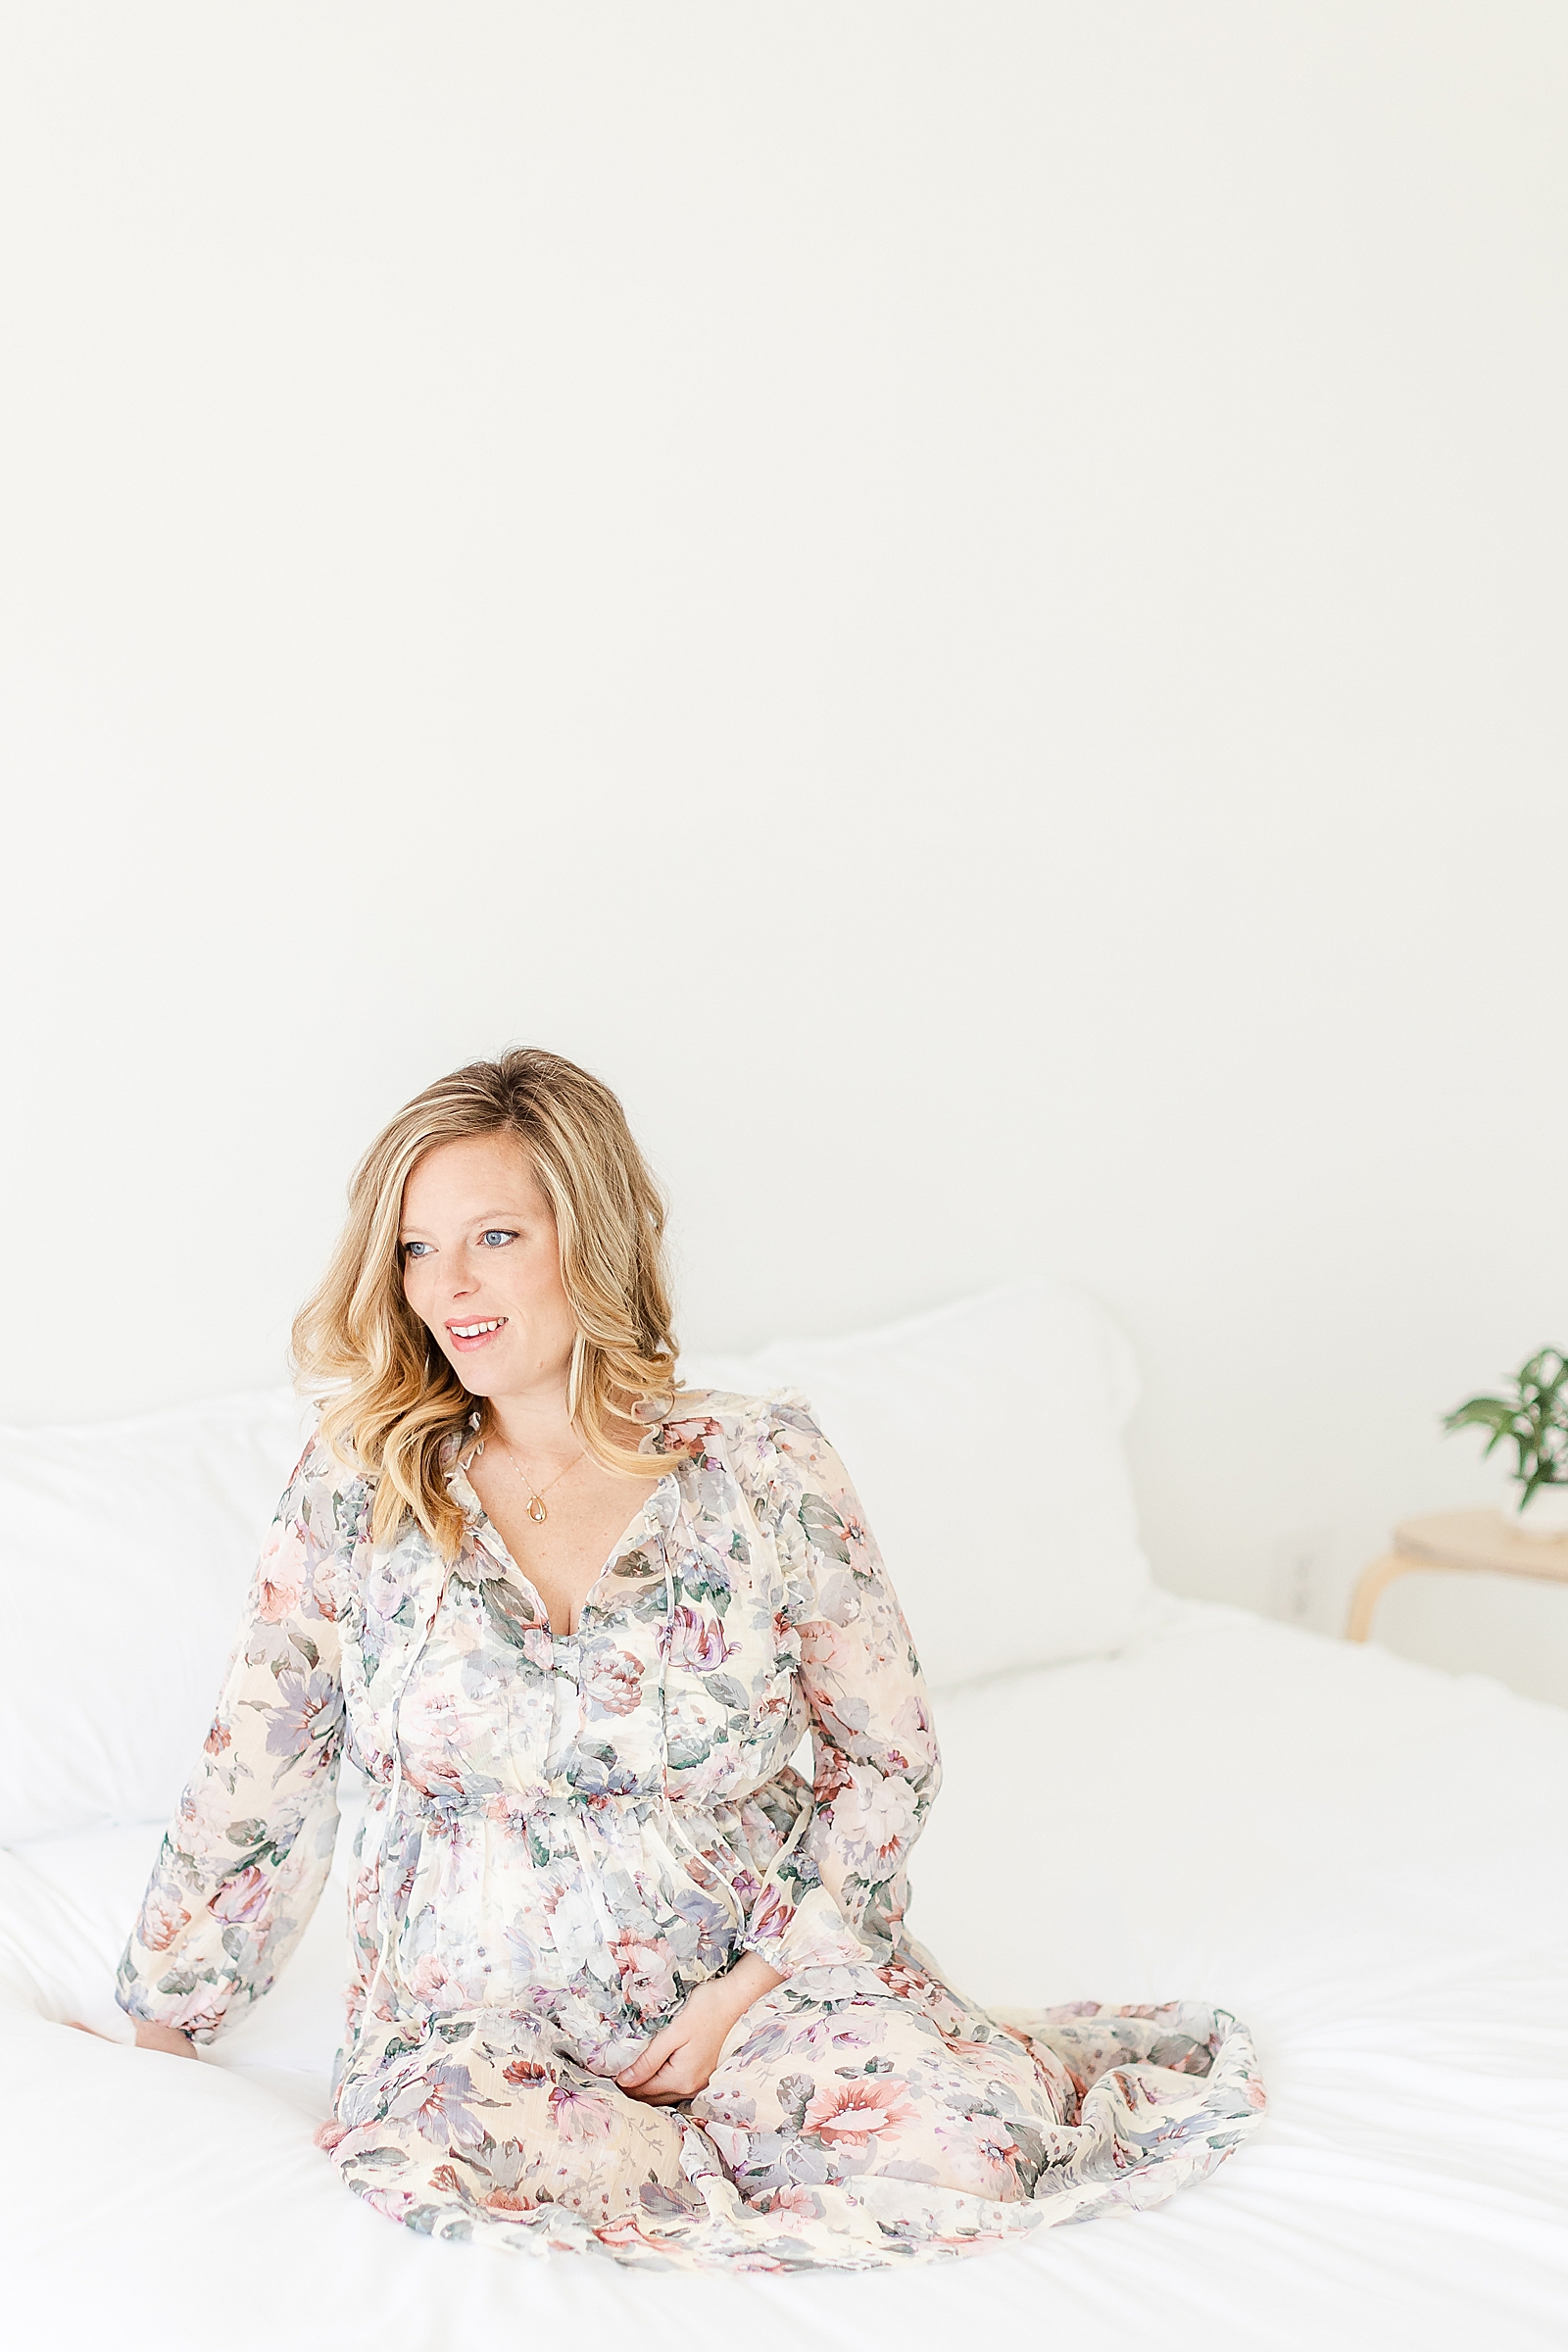 Pregnant mom sitting on bed looking out window holding baby bump wearing floral long sleeve dress for maternity photos